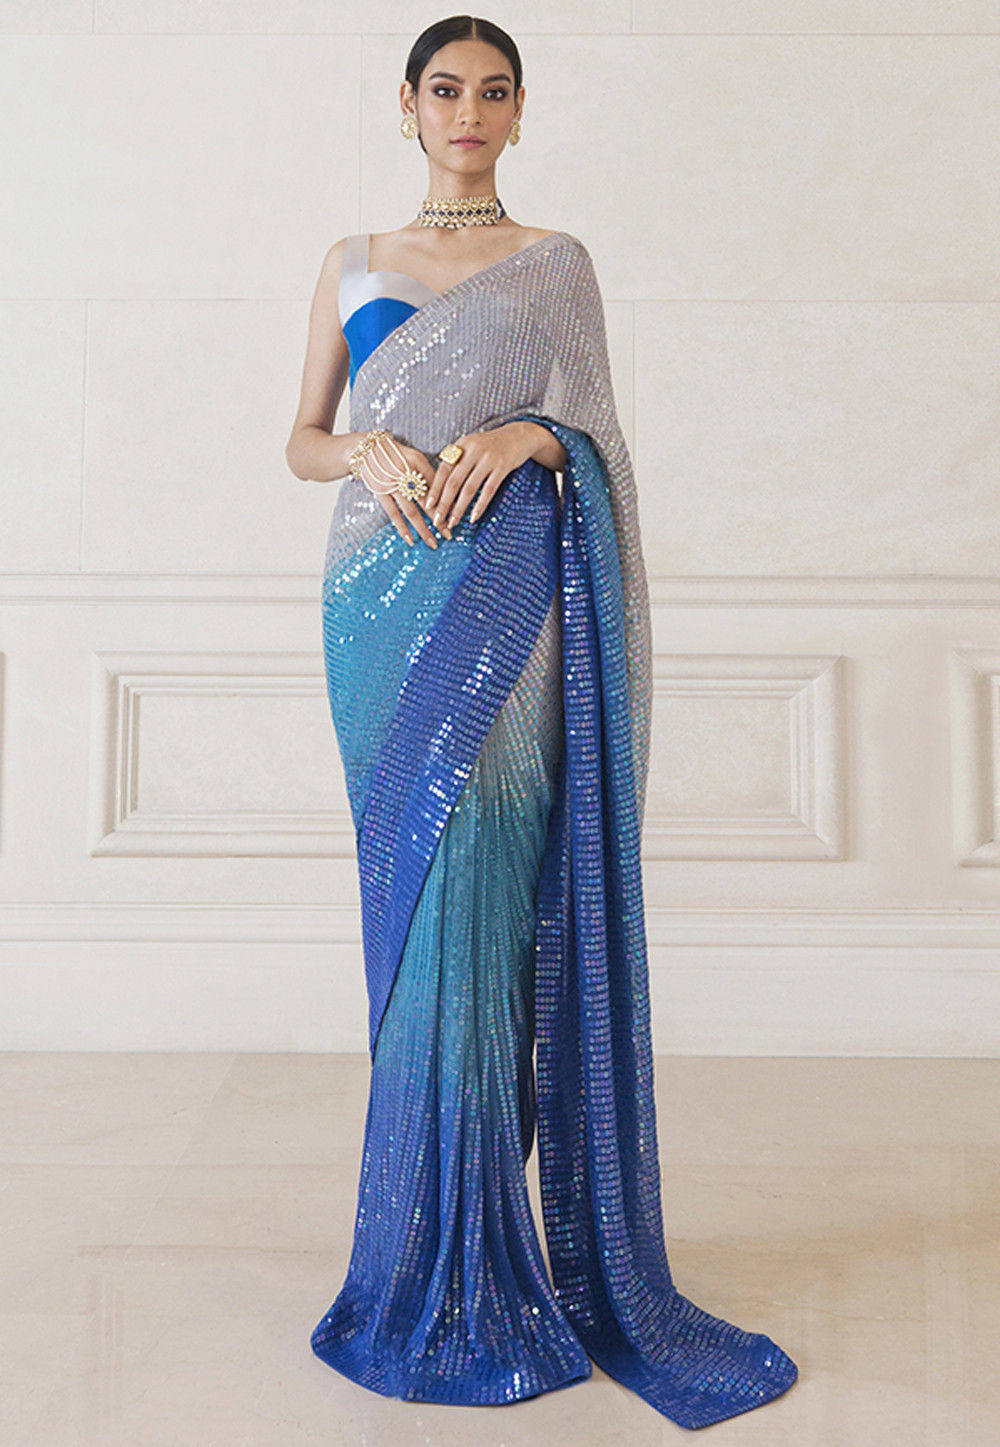 Sequinned Georgette Saree in Grey and Blue Ombre : SPF1461